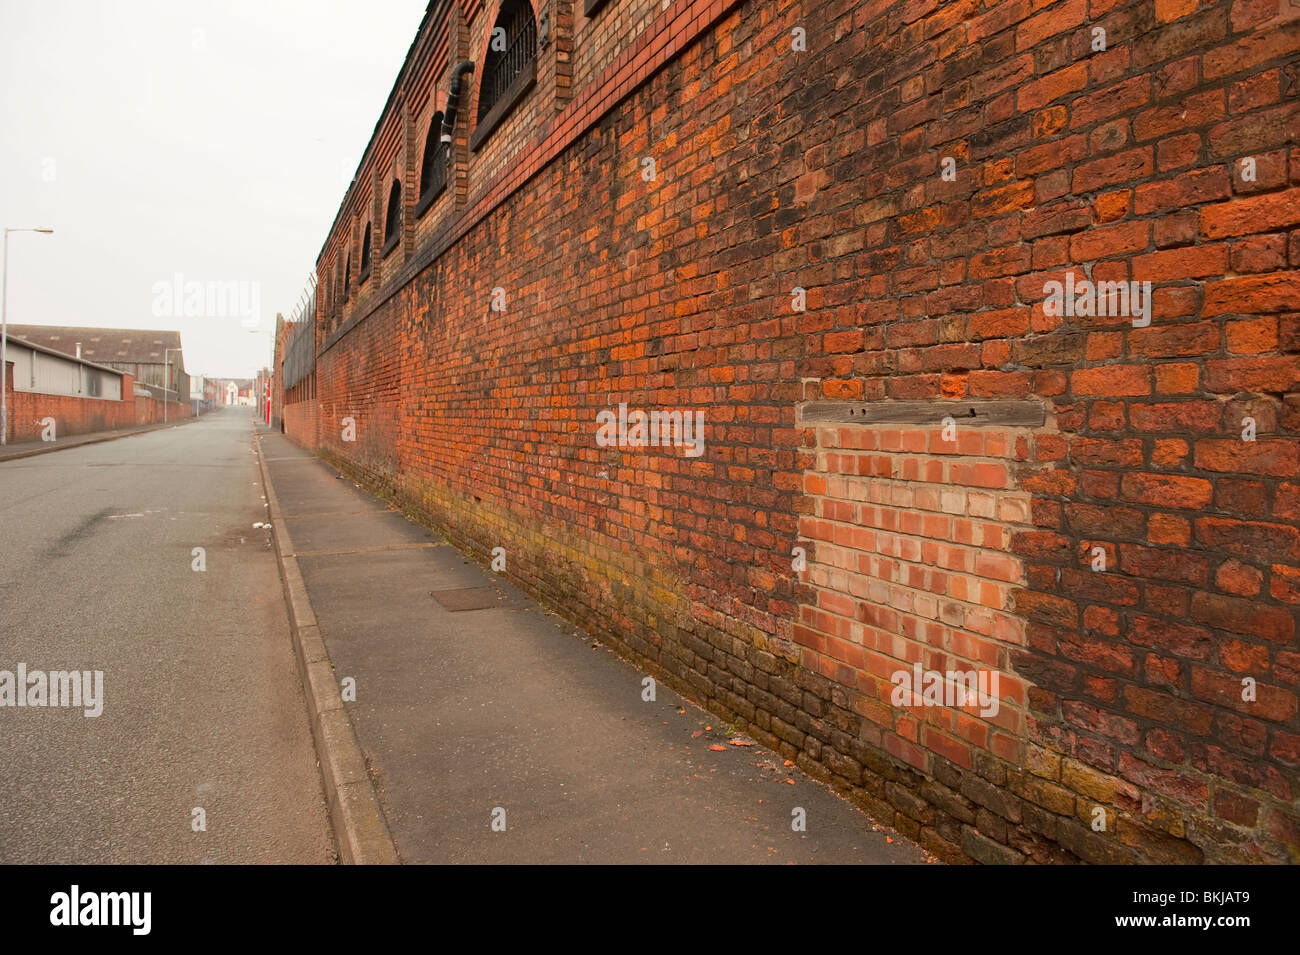 Long blank brick wall fading to vanishing point in distance Stock Photo